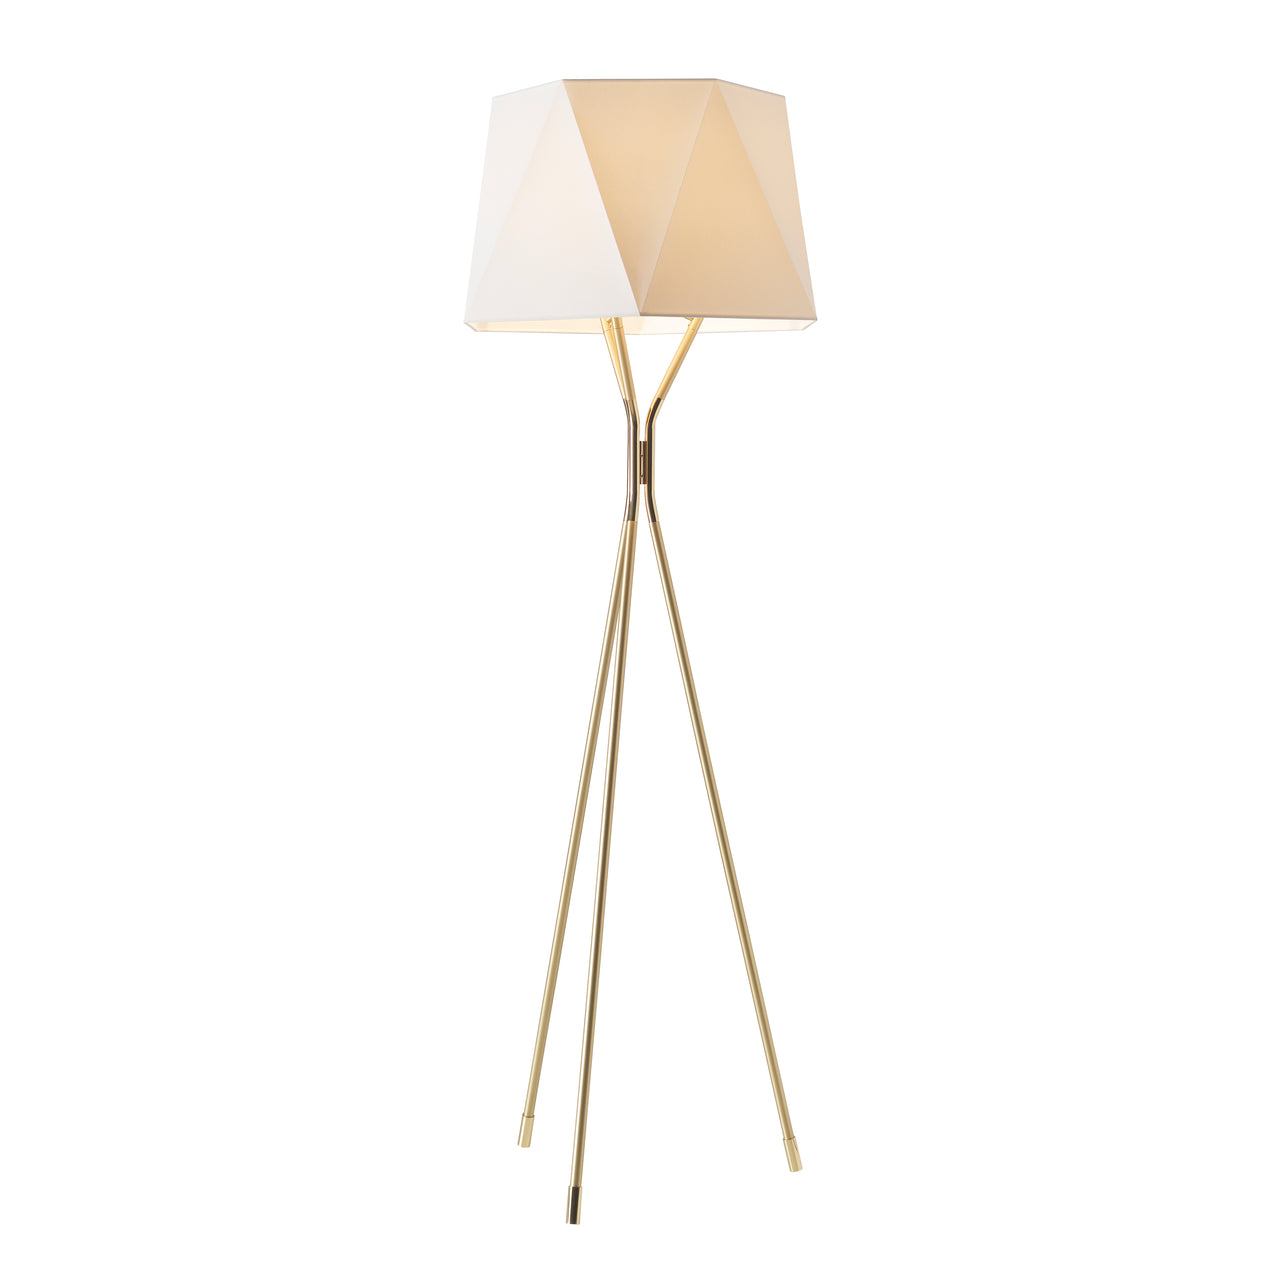 Solitaire Floor Lamp: Extra Small - 63